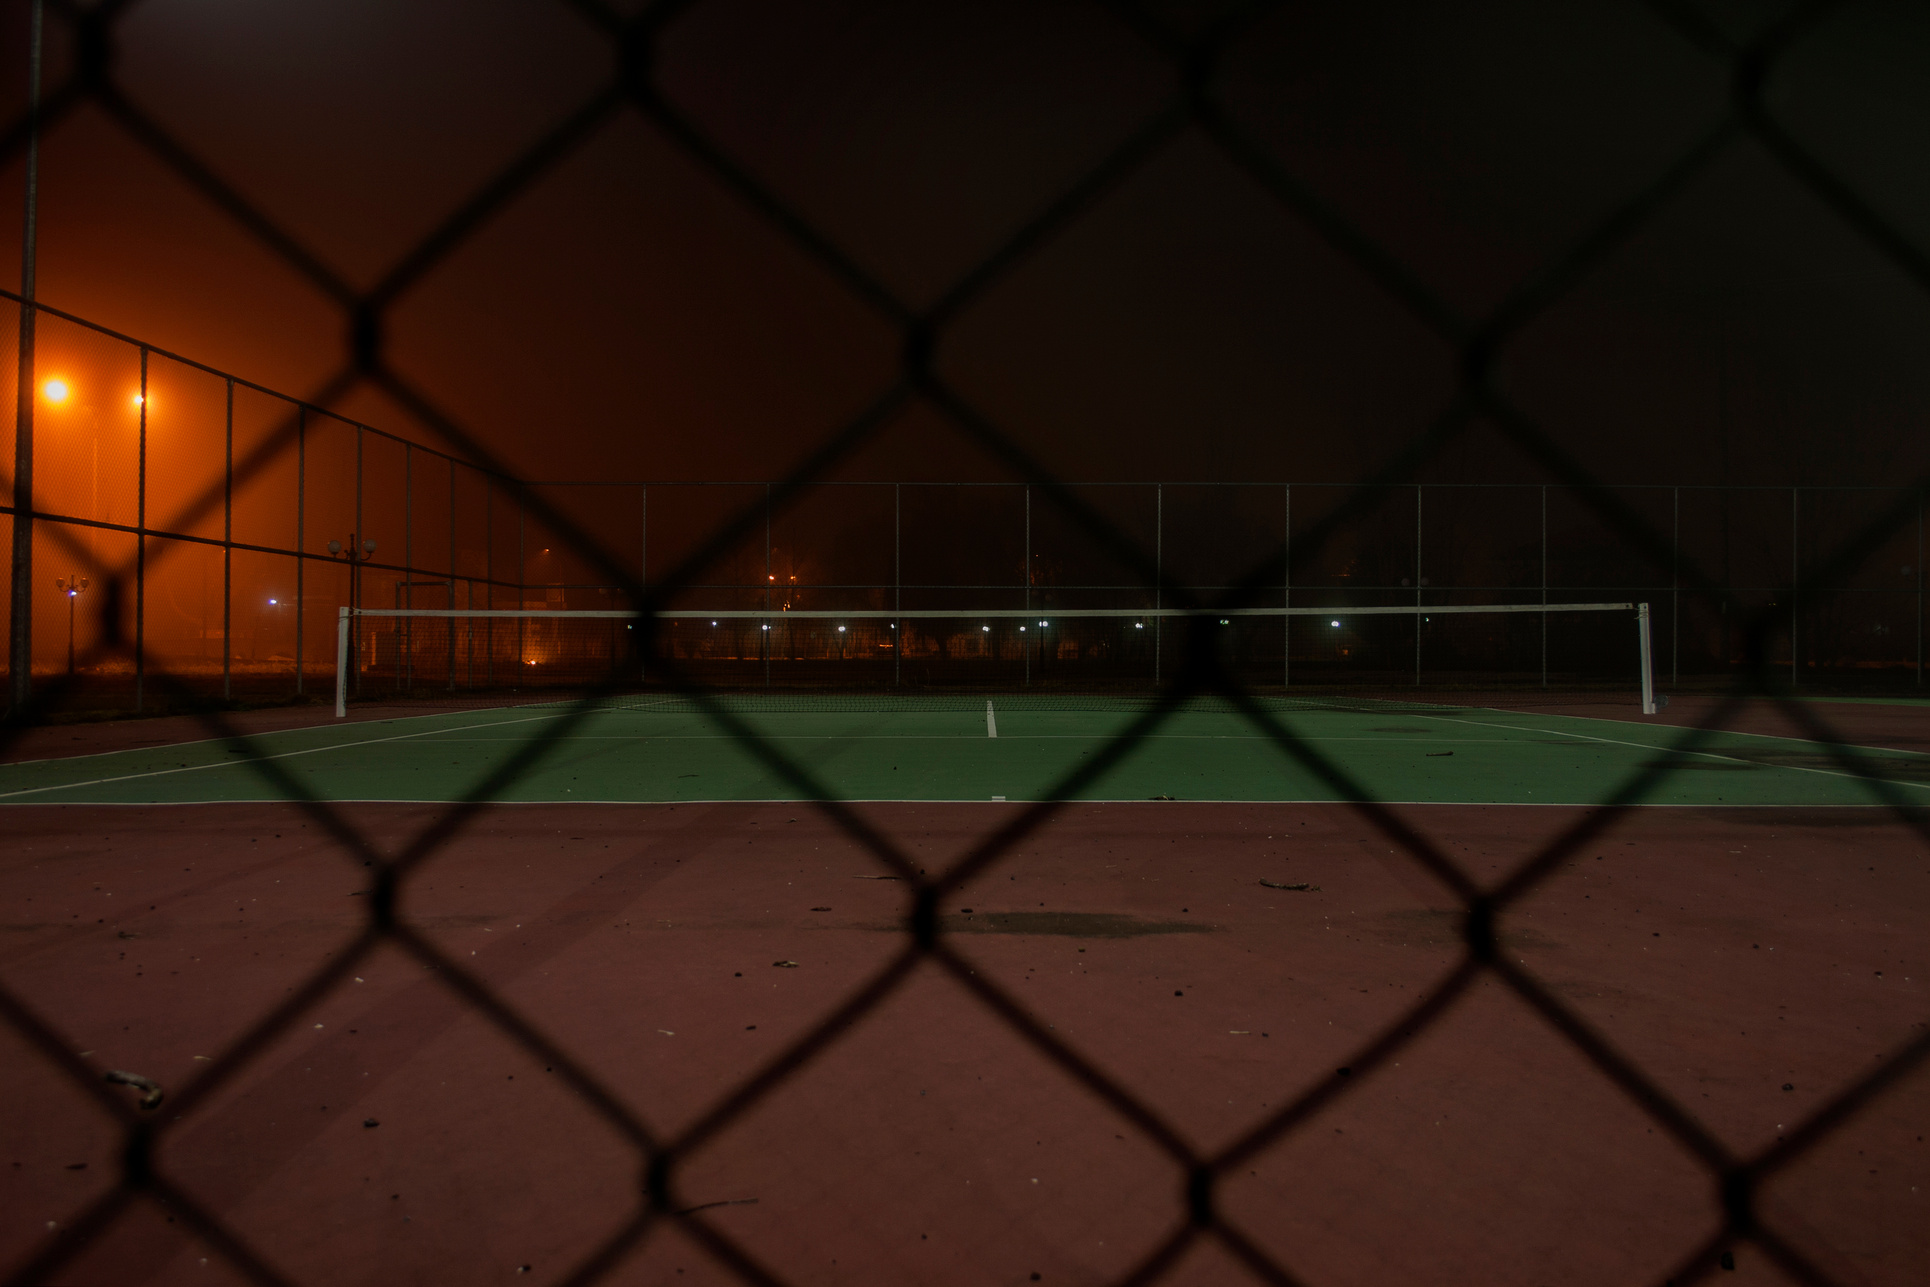 Quite Tennis Field during Nighttime